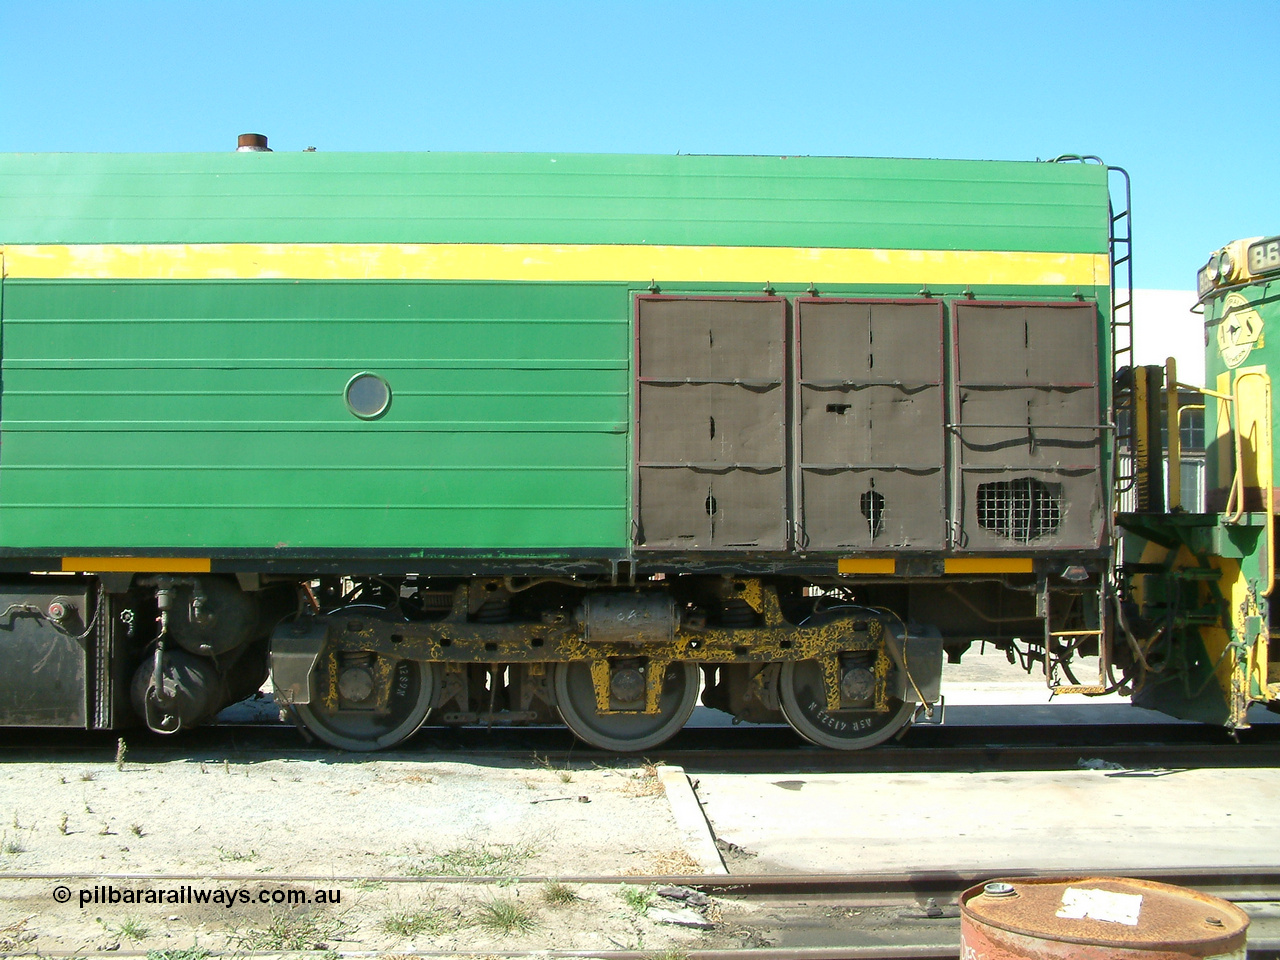 030406 113816
Port Lincoln loco workshops, still wearing the former owner's AN livery, Australian Southern locomotive and NJ class leader NJ 1 'Ben Chifley' Clyde Engineering EMD model JL22C serial 71-728, no. 2 end view. 6th April 2003.
Keywords: NJ-class;NJ1;71-728;Clyde-Engineering-Granville-NSW;EMD;JL22C;